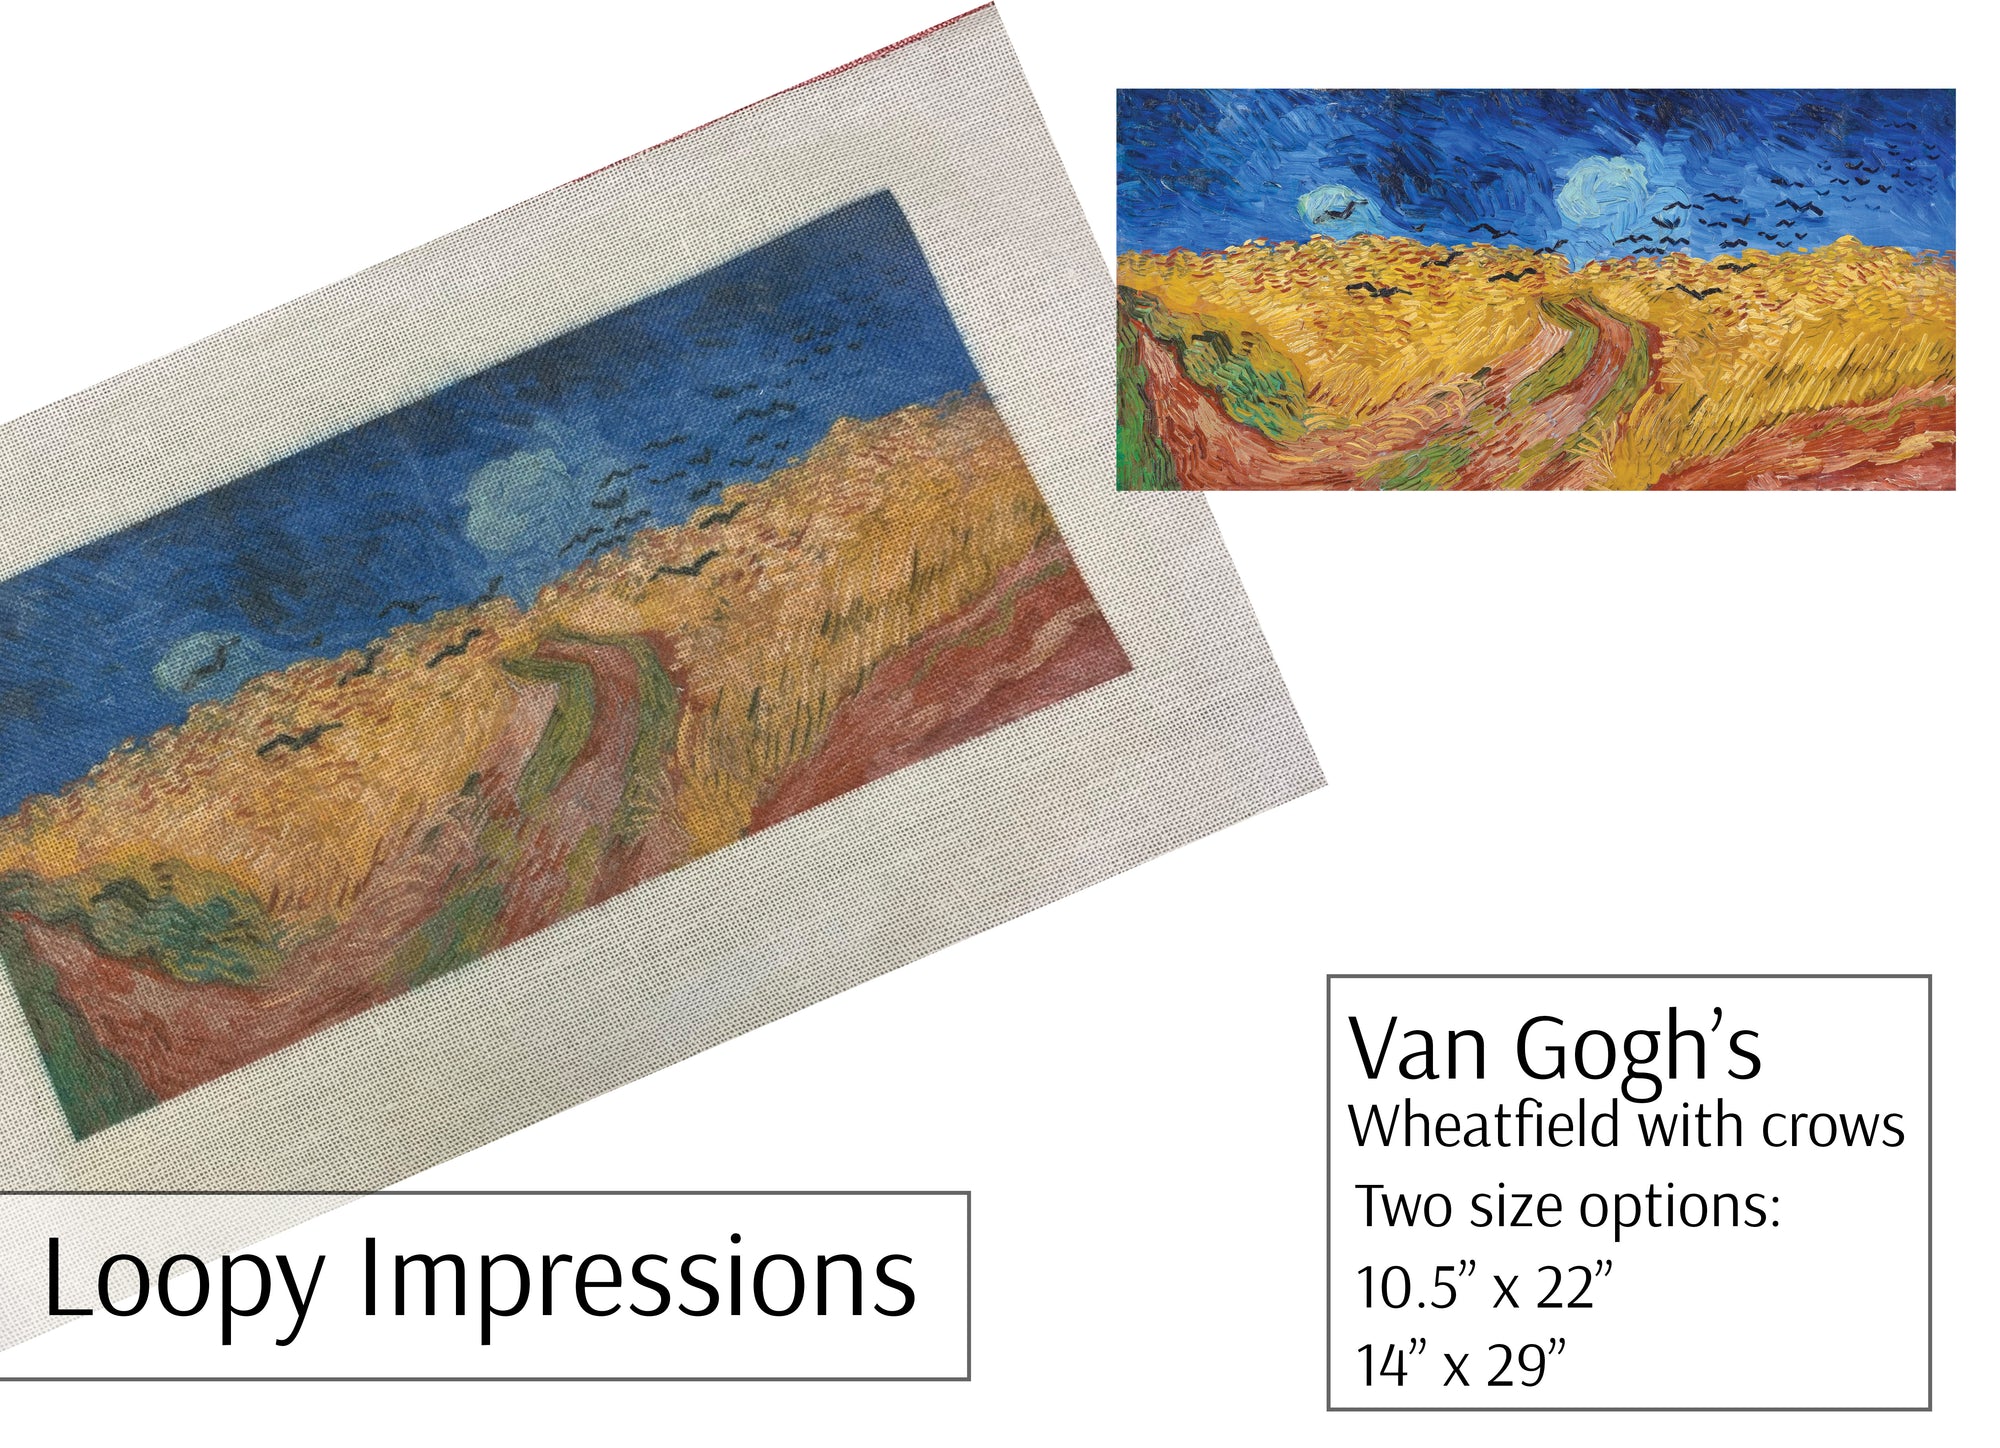 Loopy Impressions Van Gogh's Wheatfield with crows